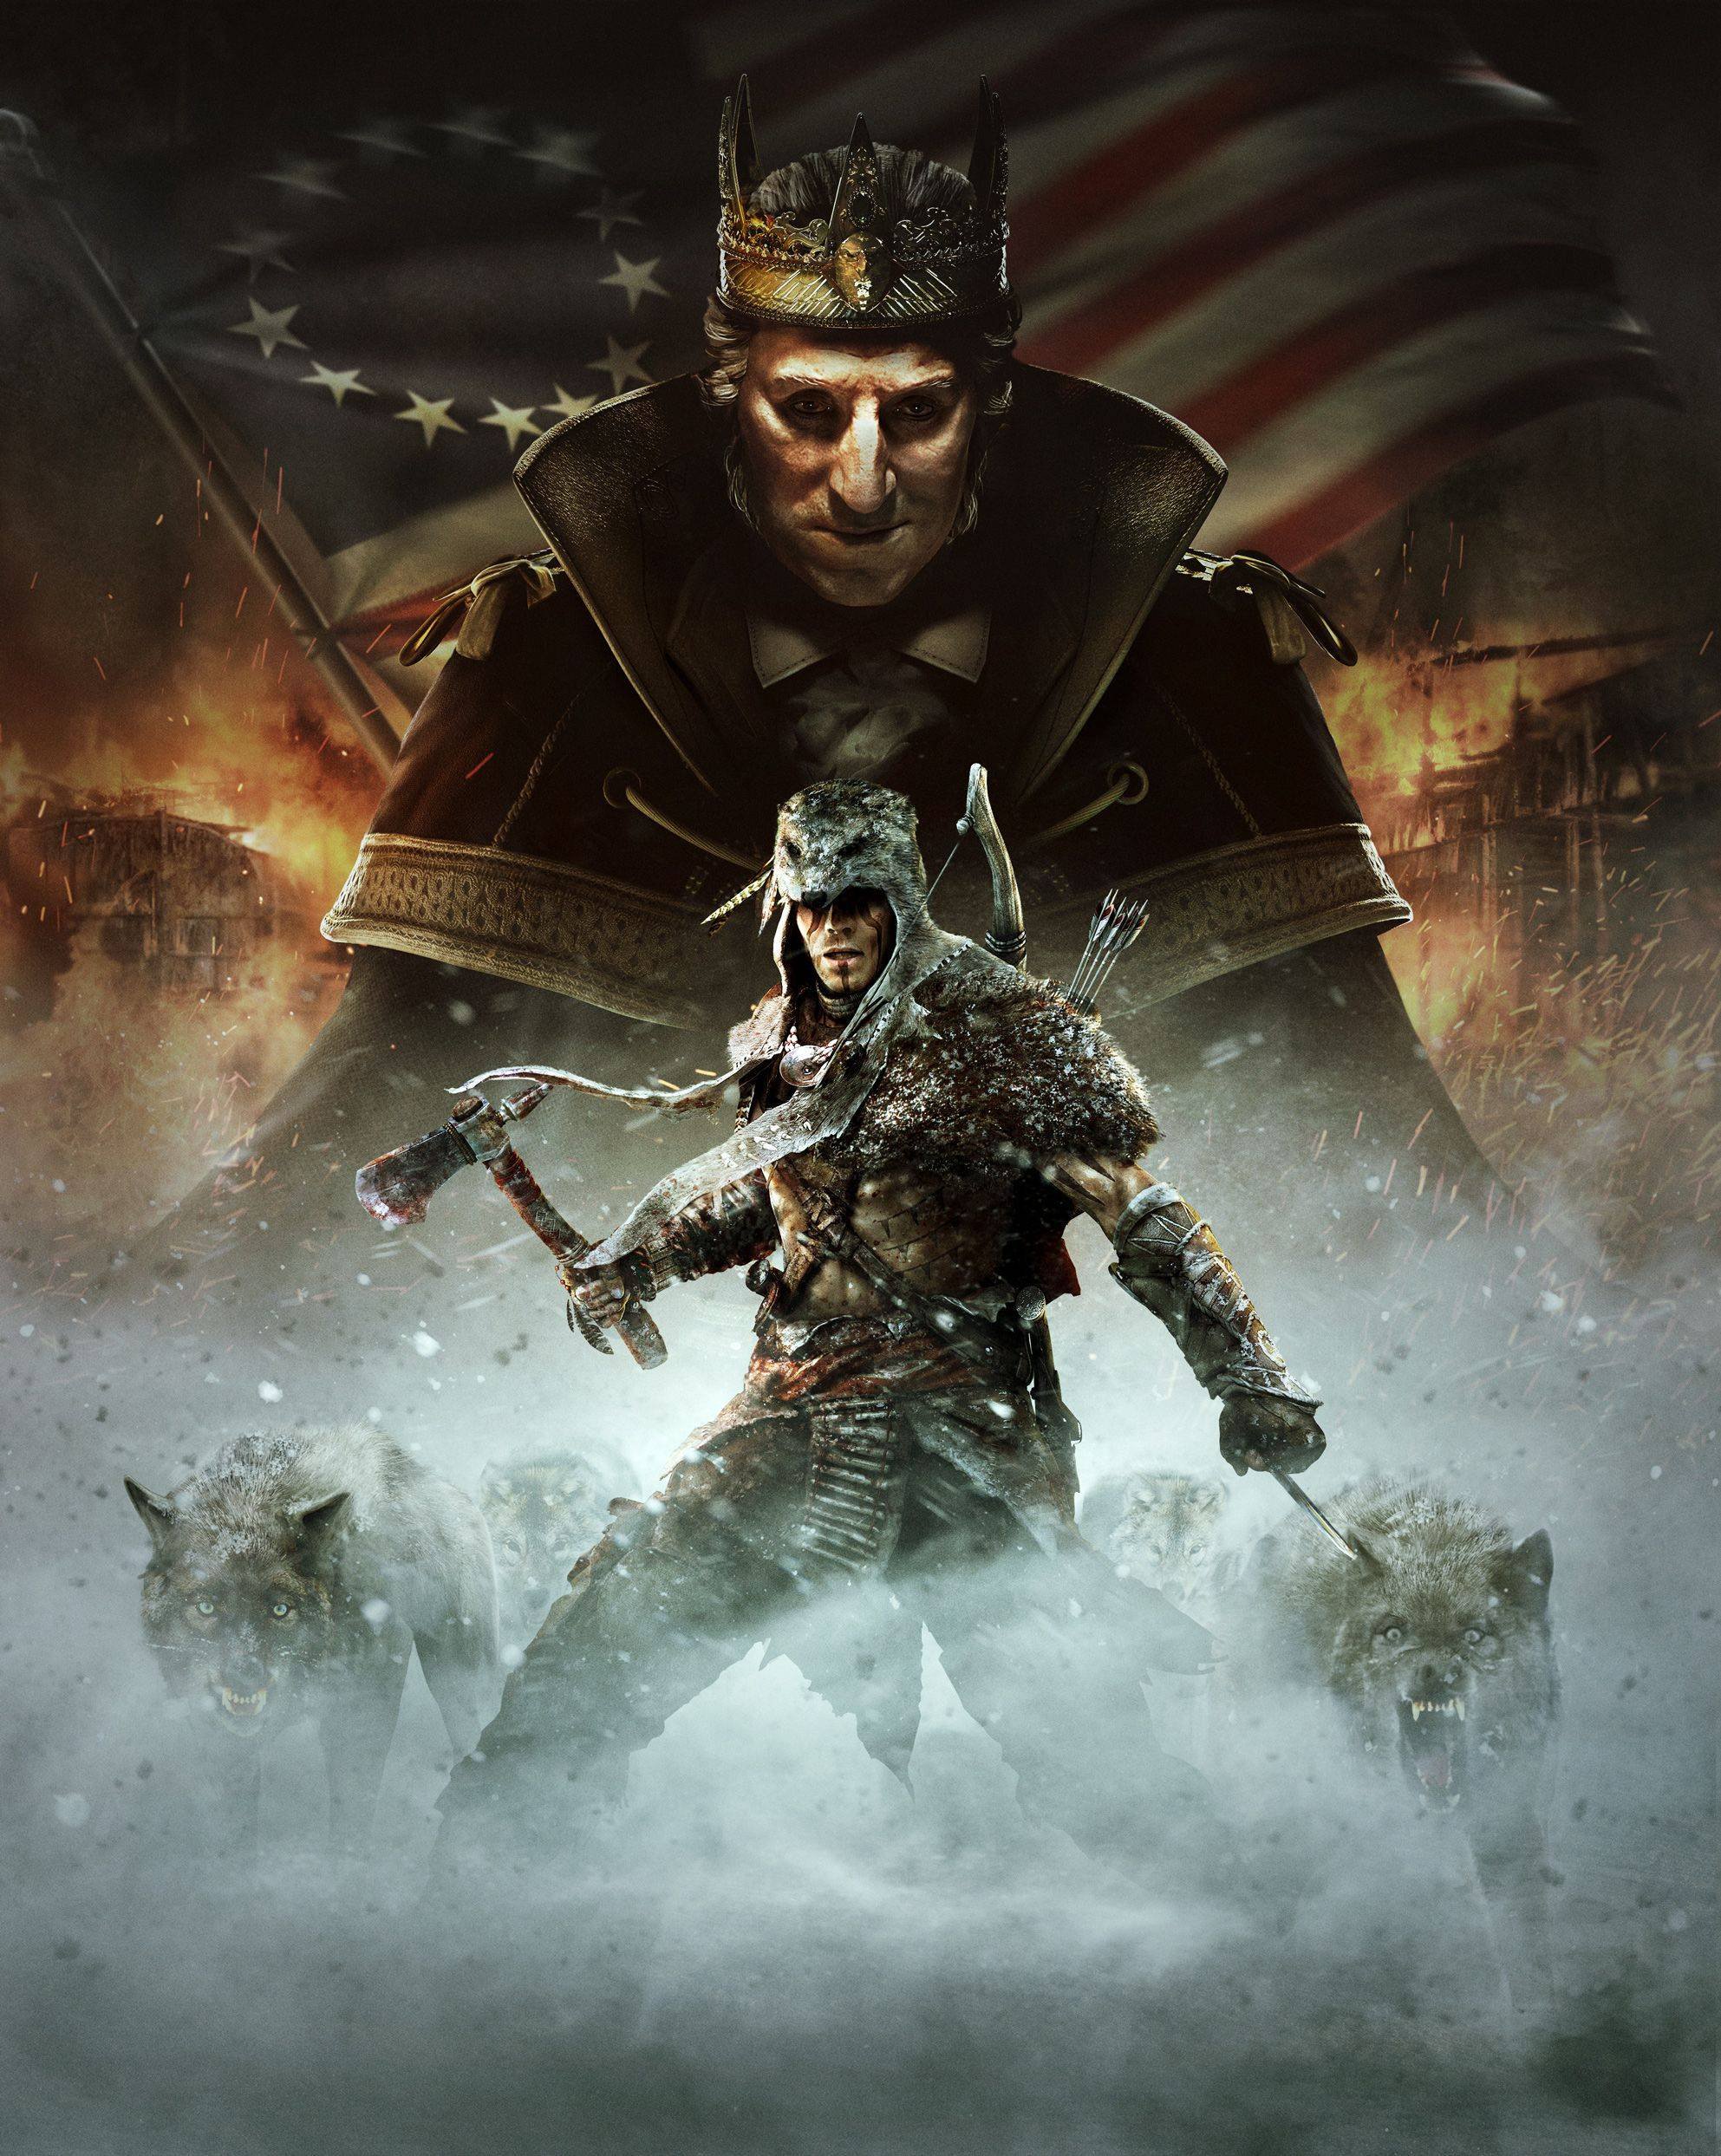 Assassins Creed 3 The Tyranny of King Washington The Redemption 1